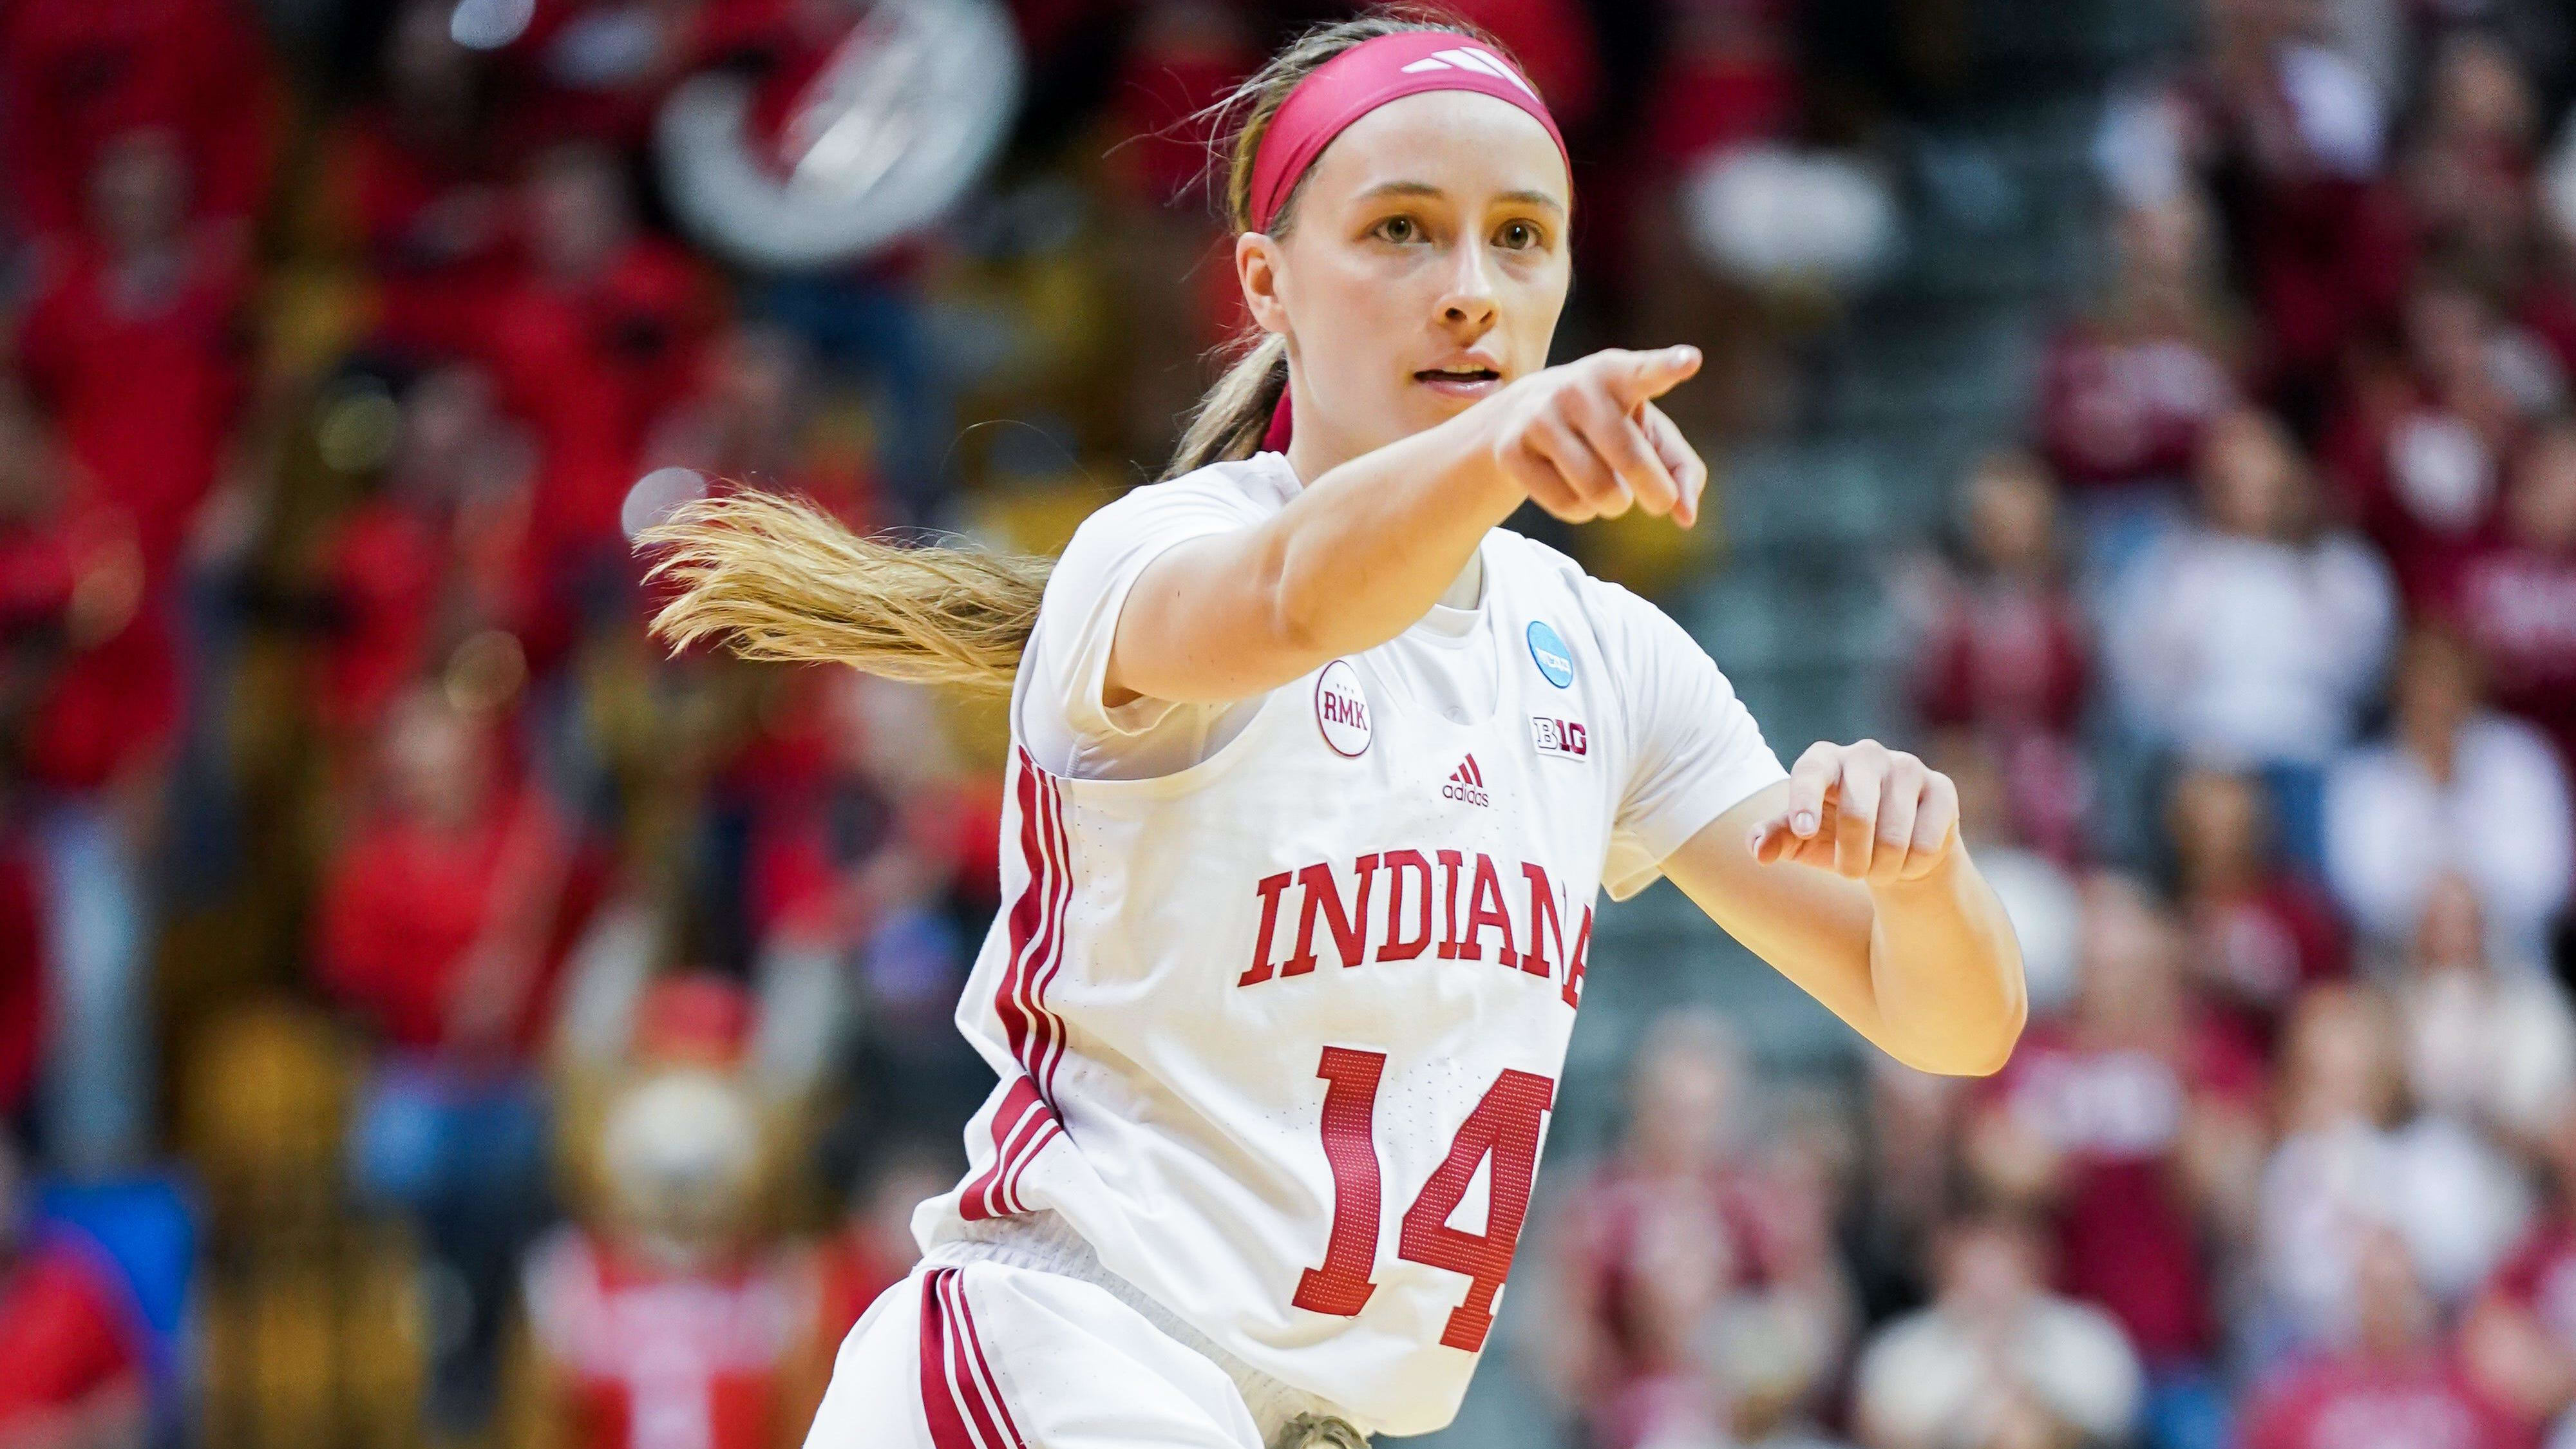 Indiana’s Sara Scalia Earns All-Big Ten First Team Spot Despite Going Undrafted in 2024 WNBA Draft